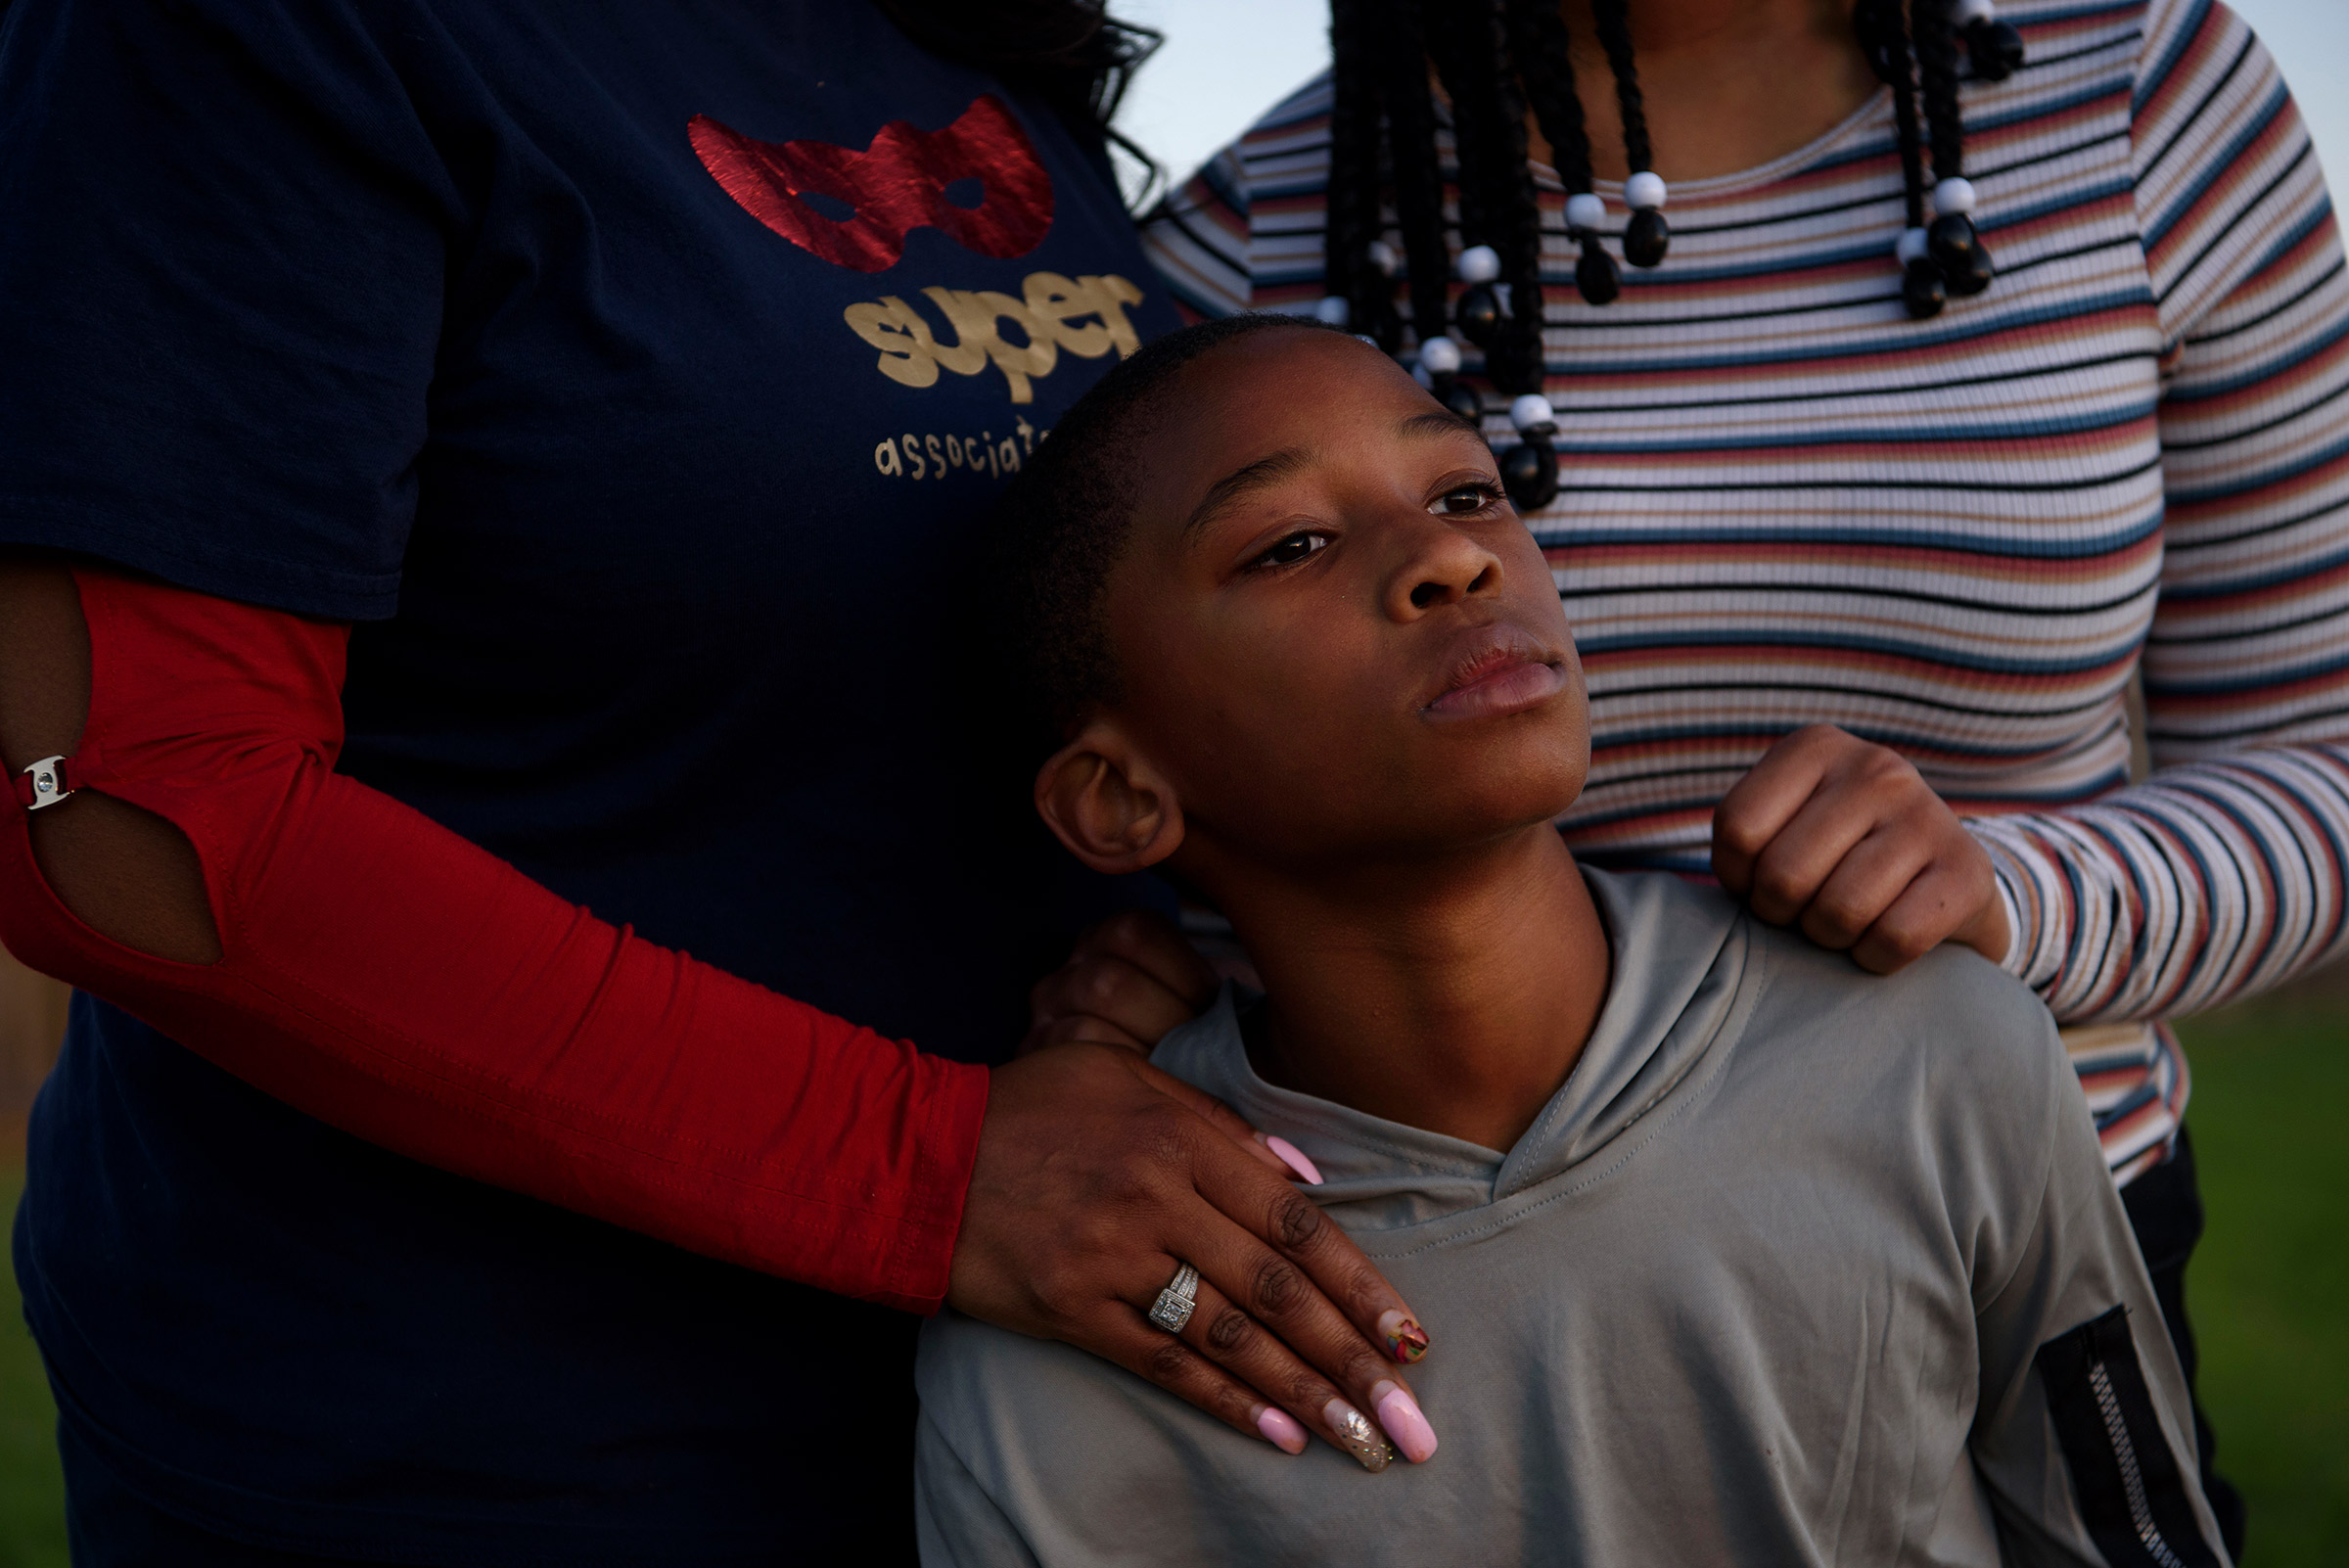 FRESNO, TX – OCTOBER 29, 2021: Adin James, 8, poses for a portrait alongside his sister, Madison, 16, and his mother, Ebony, 50, following the death of his father, Terrence James, who died after becoming ill with COVID-19, in Fresno, Texas.